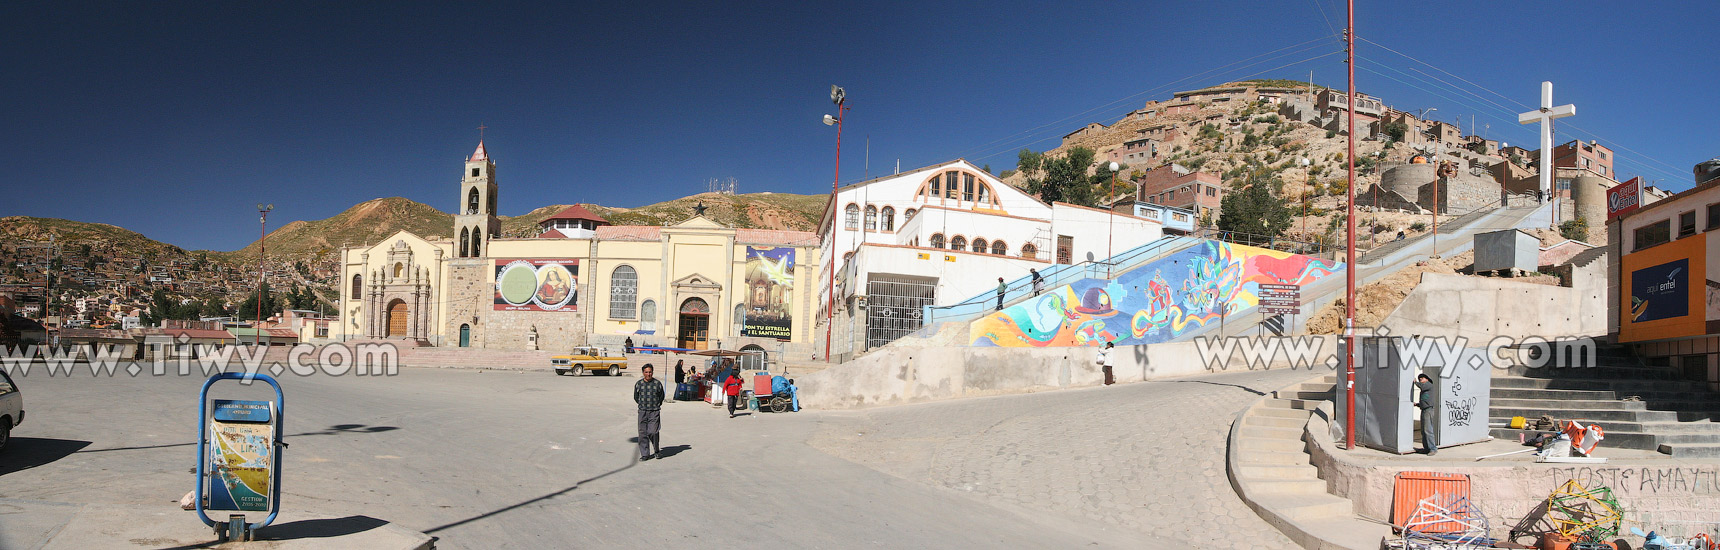 Folklore square and Sanctuary of the Virgin of Socavon